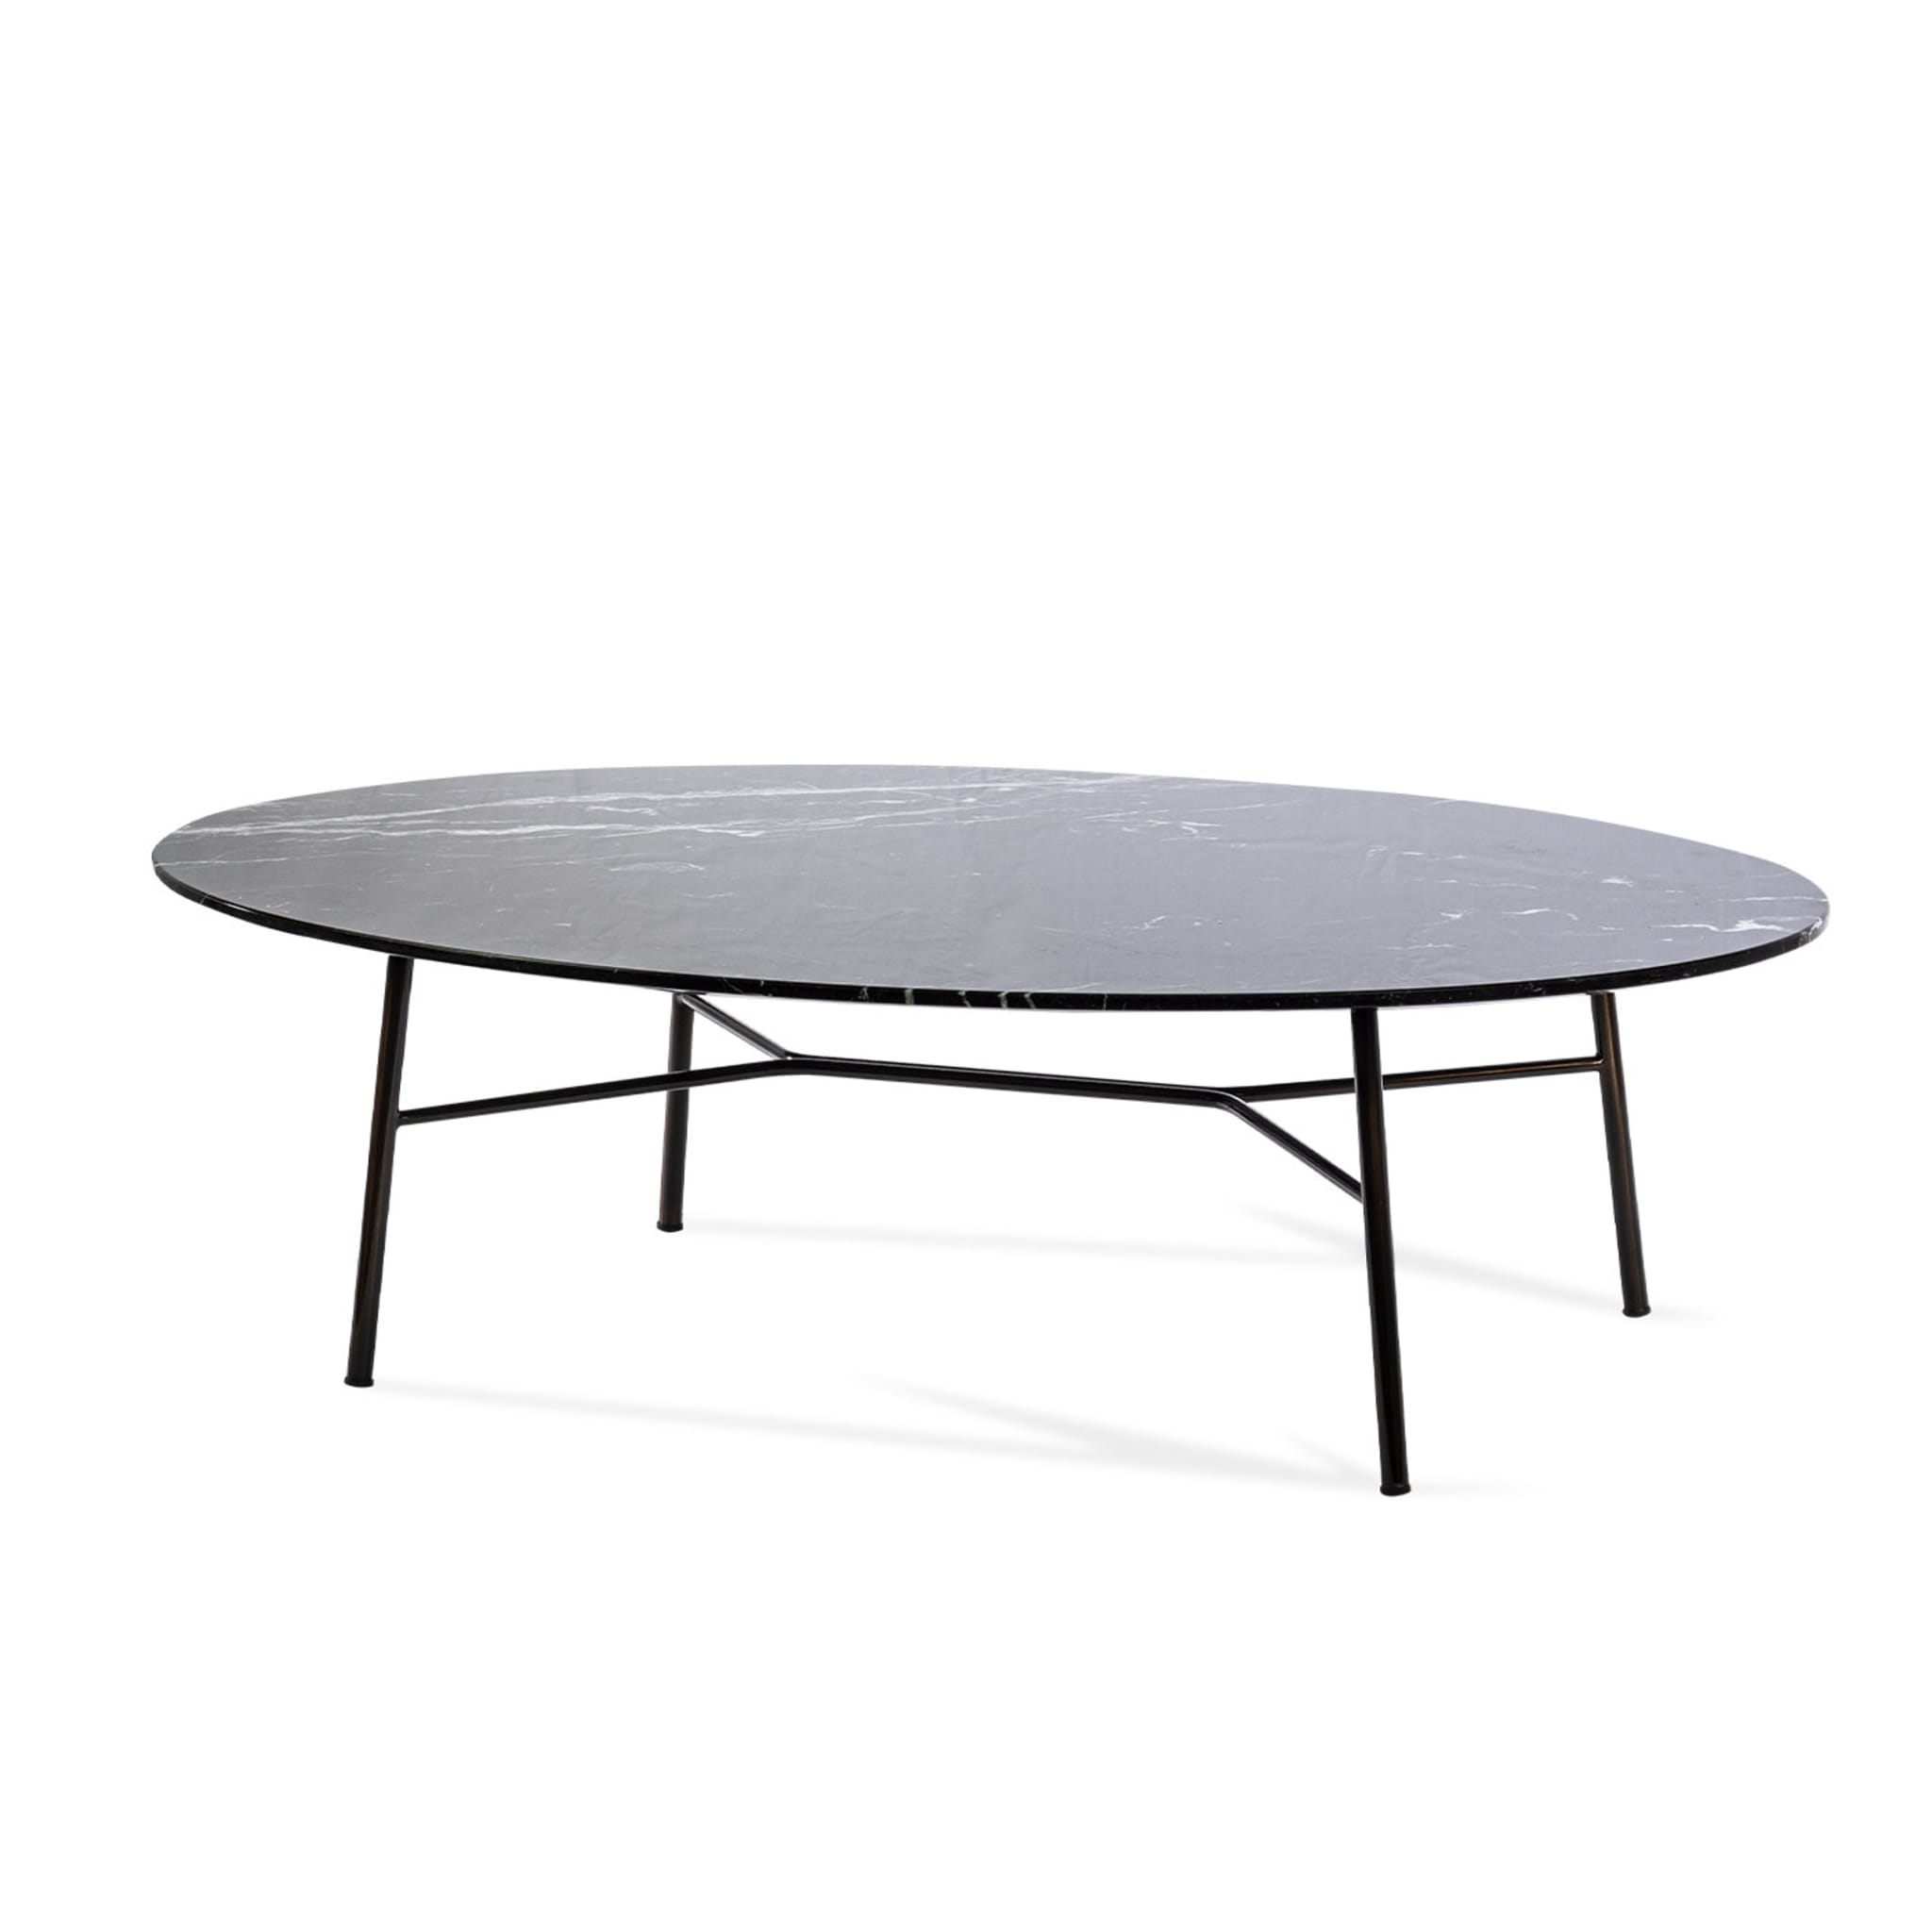 Yuki Oval Coffee Table with Black Marquinia Top # 1 by Ep Studio - Alternative view 1